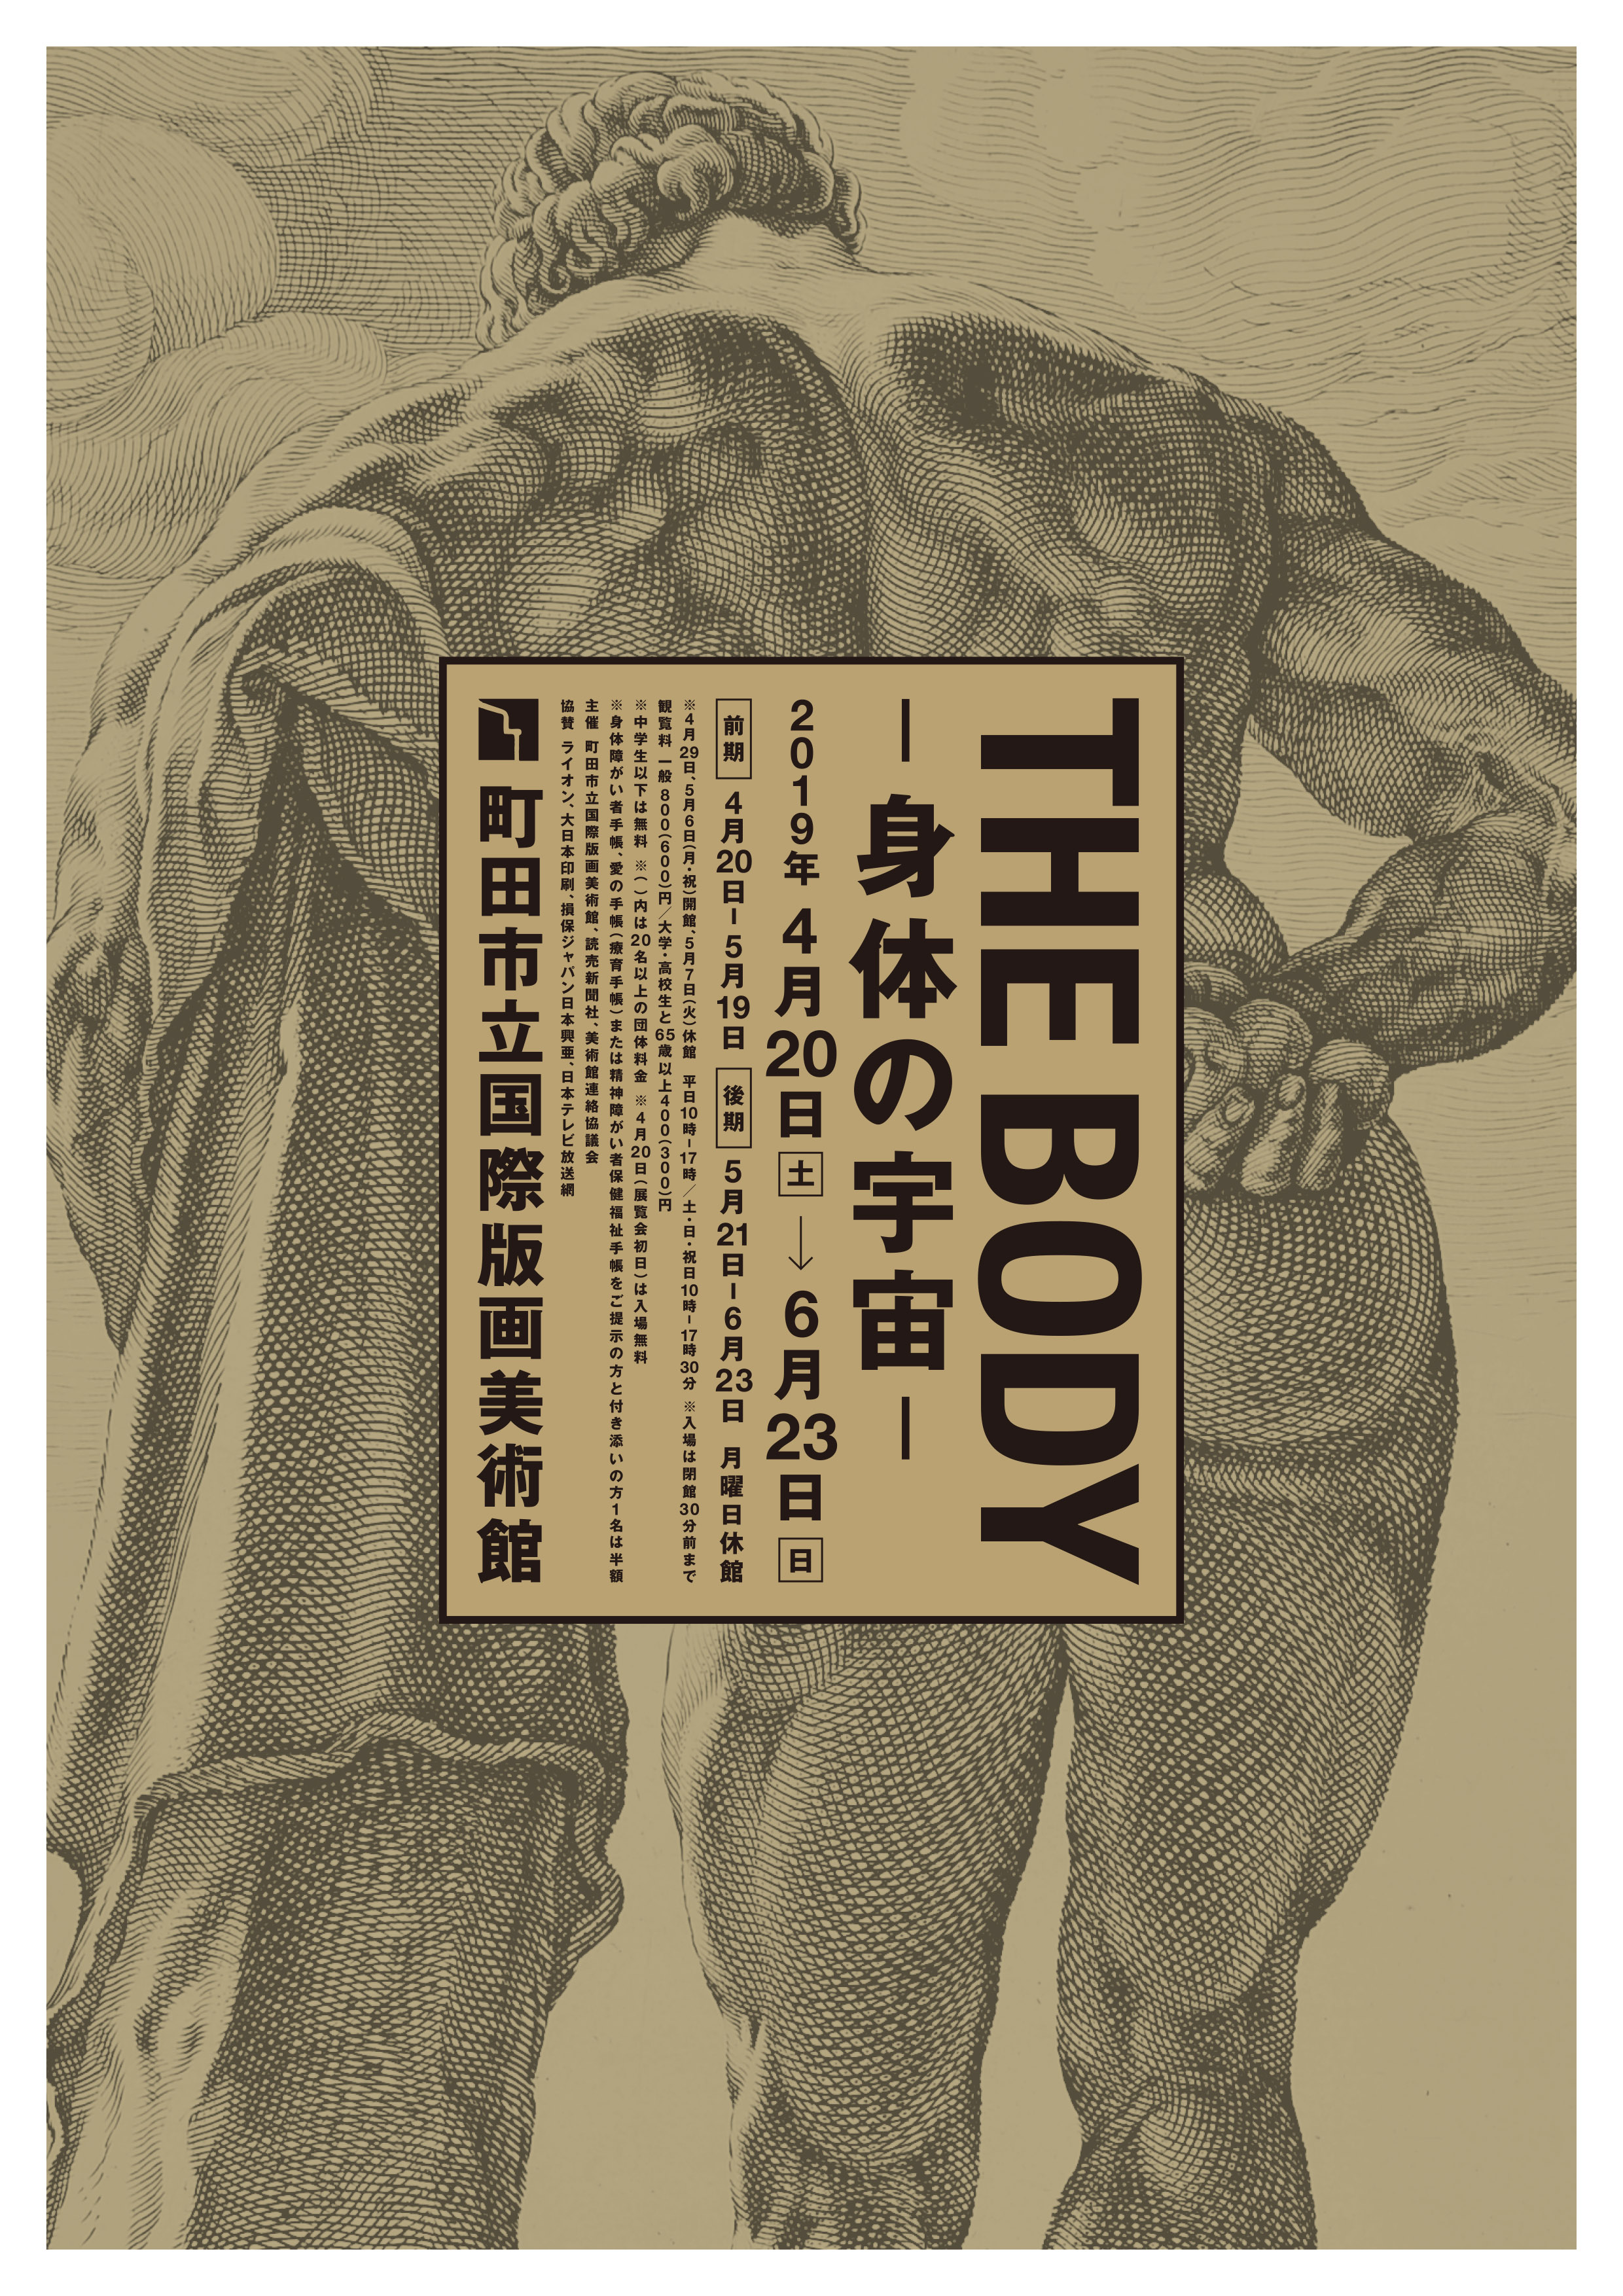 THE BODY ― 身体の宇宙 ―